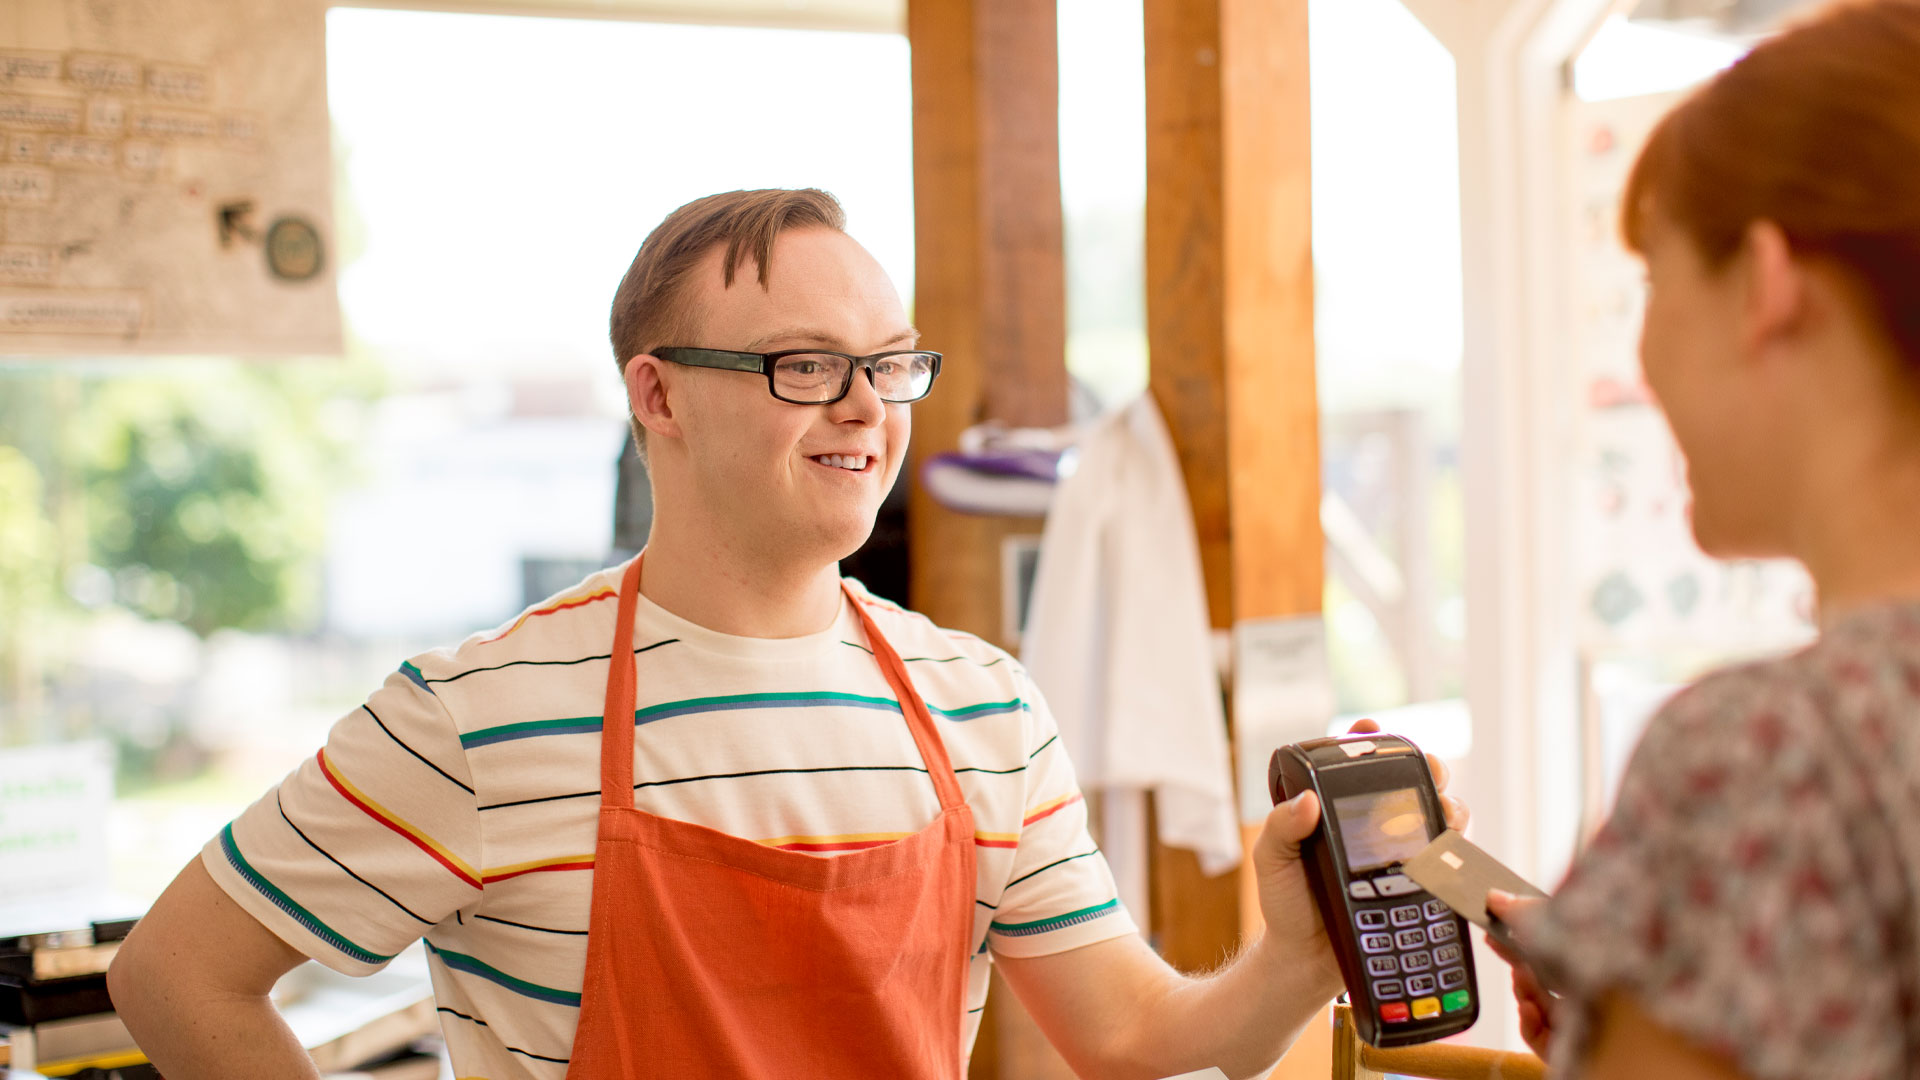 Young man working in a retail outlet handing a customer an eftpos machine to pay for their goods.